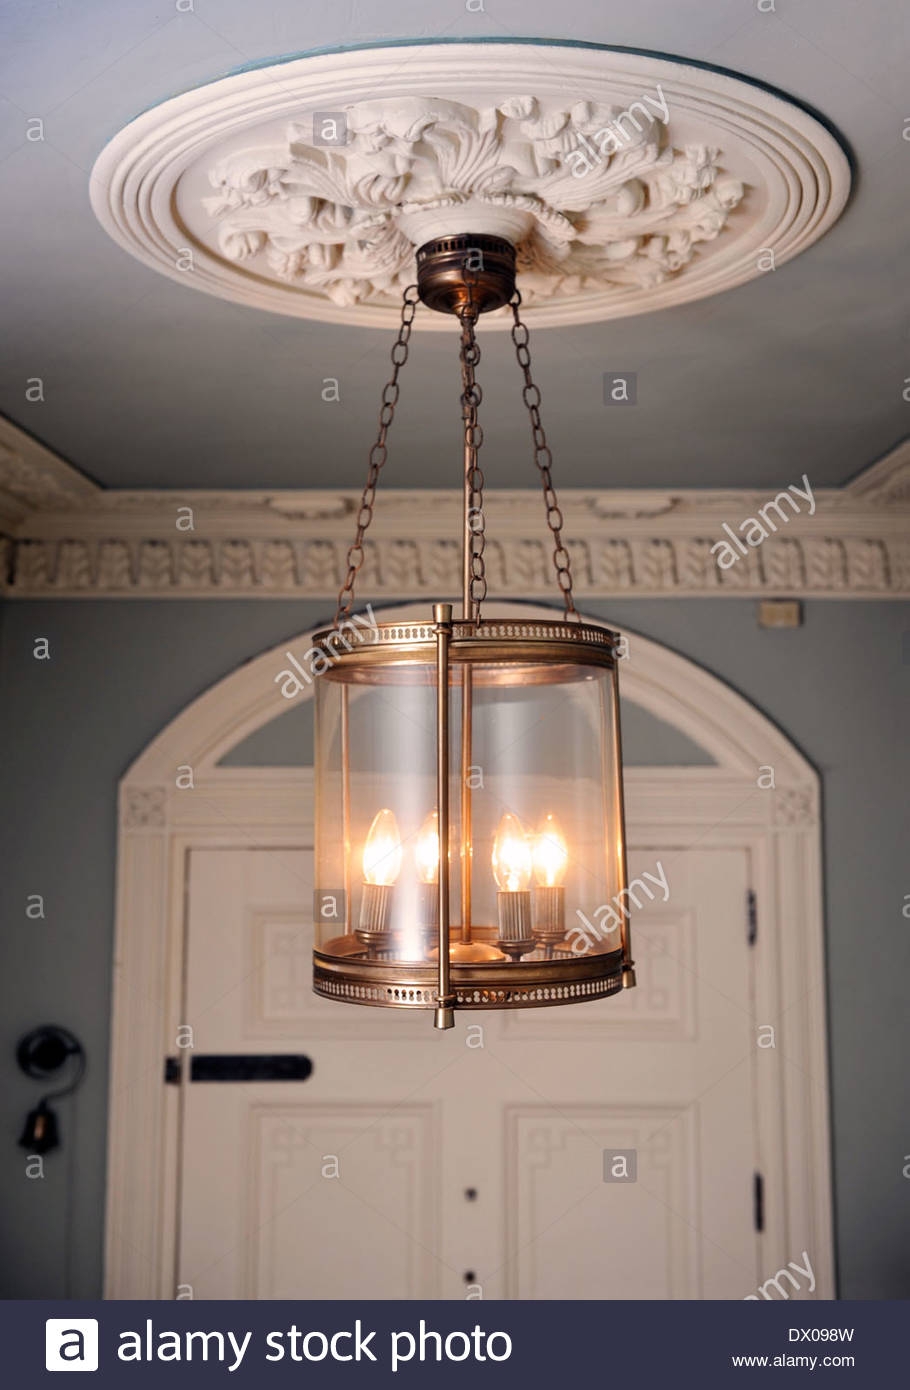 Hanging Light From Plaster Ceiling910 X 1390